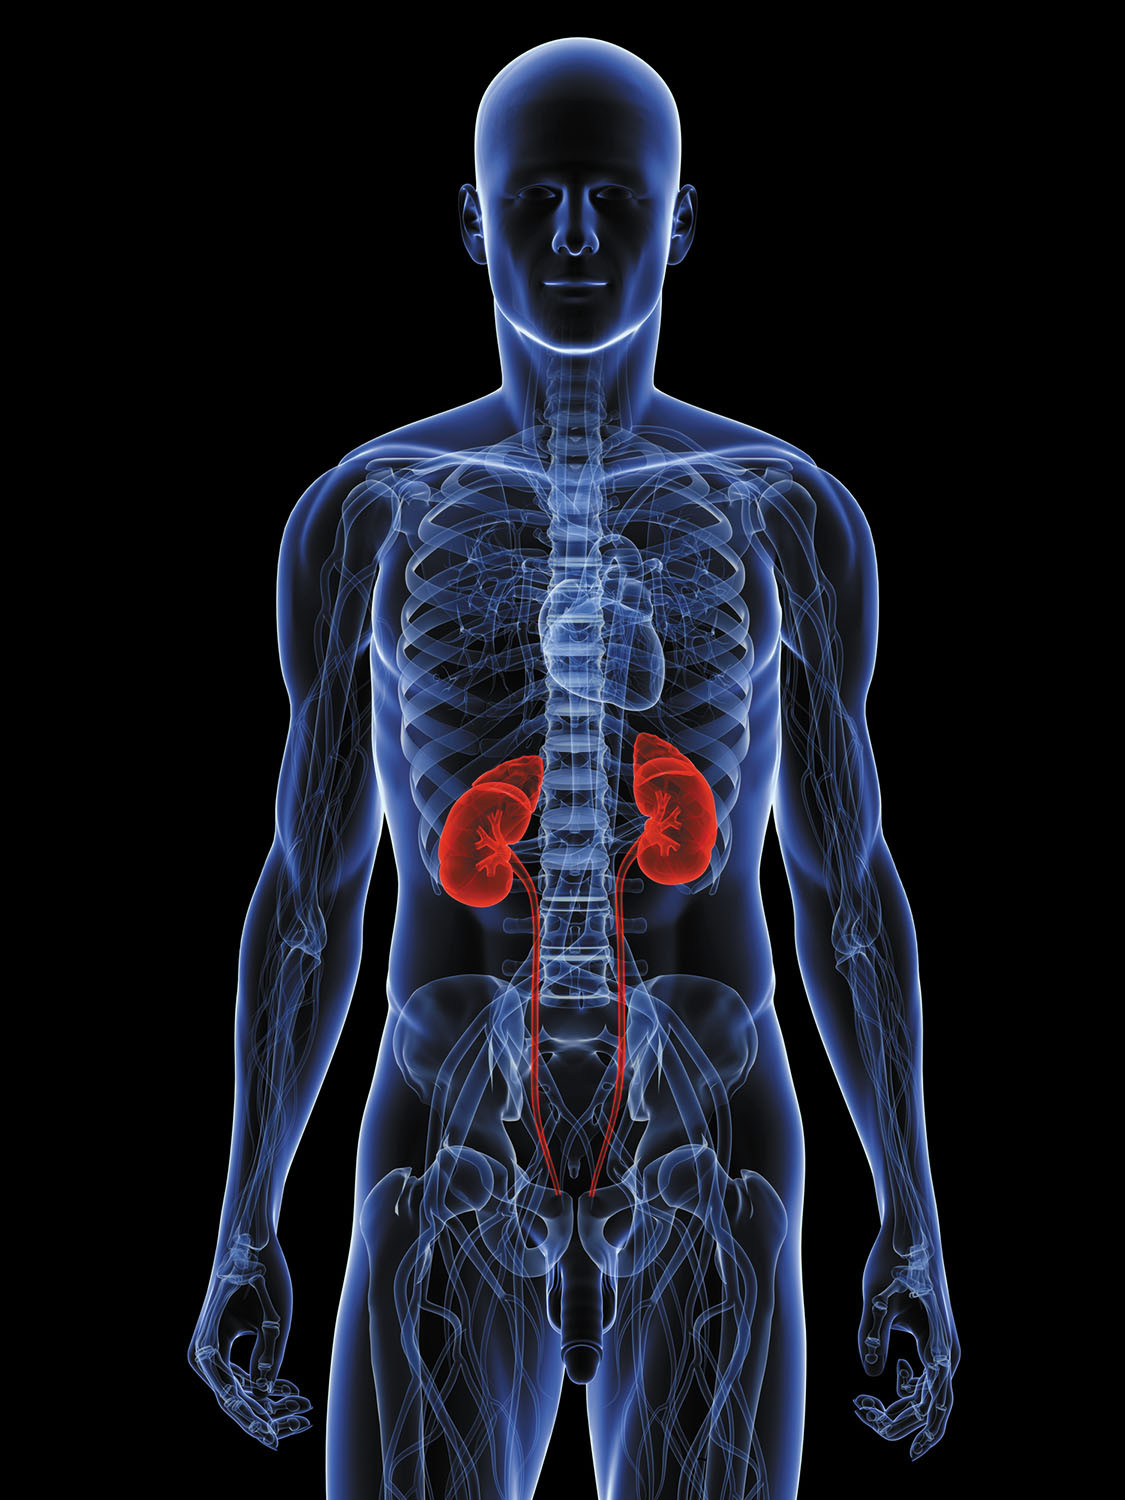 Is my kidney causing my back pain?